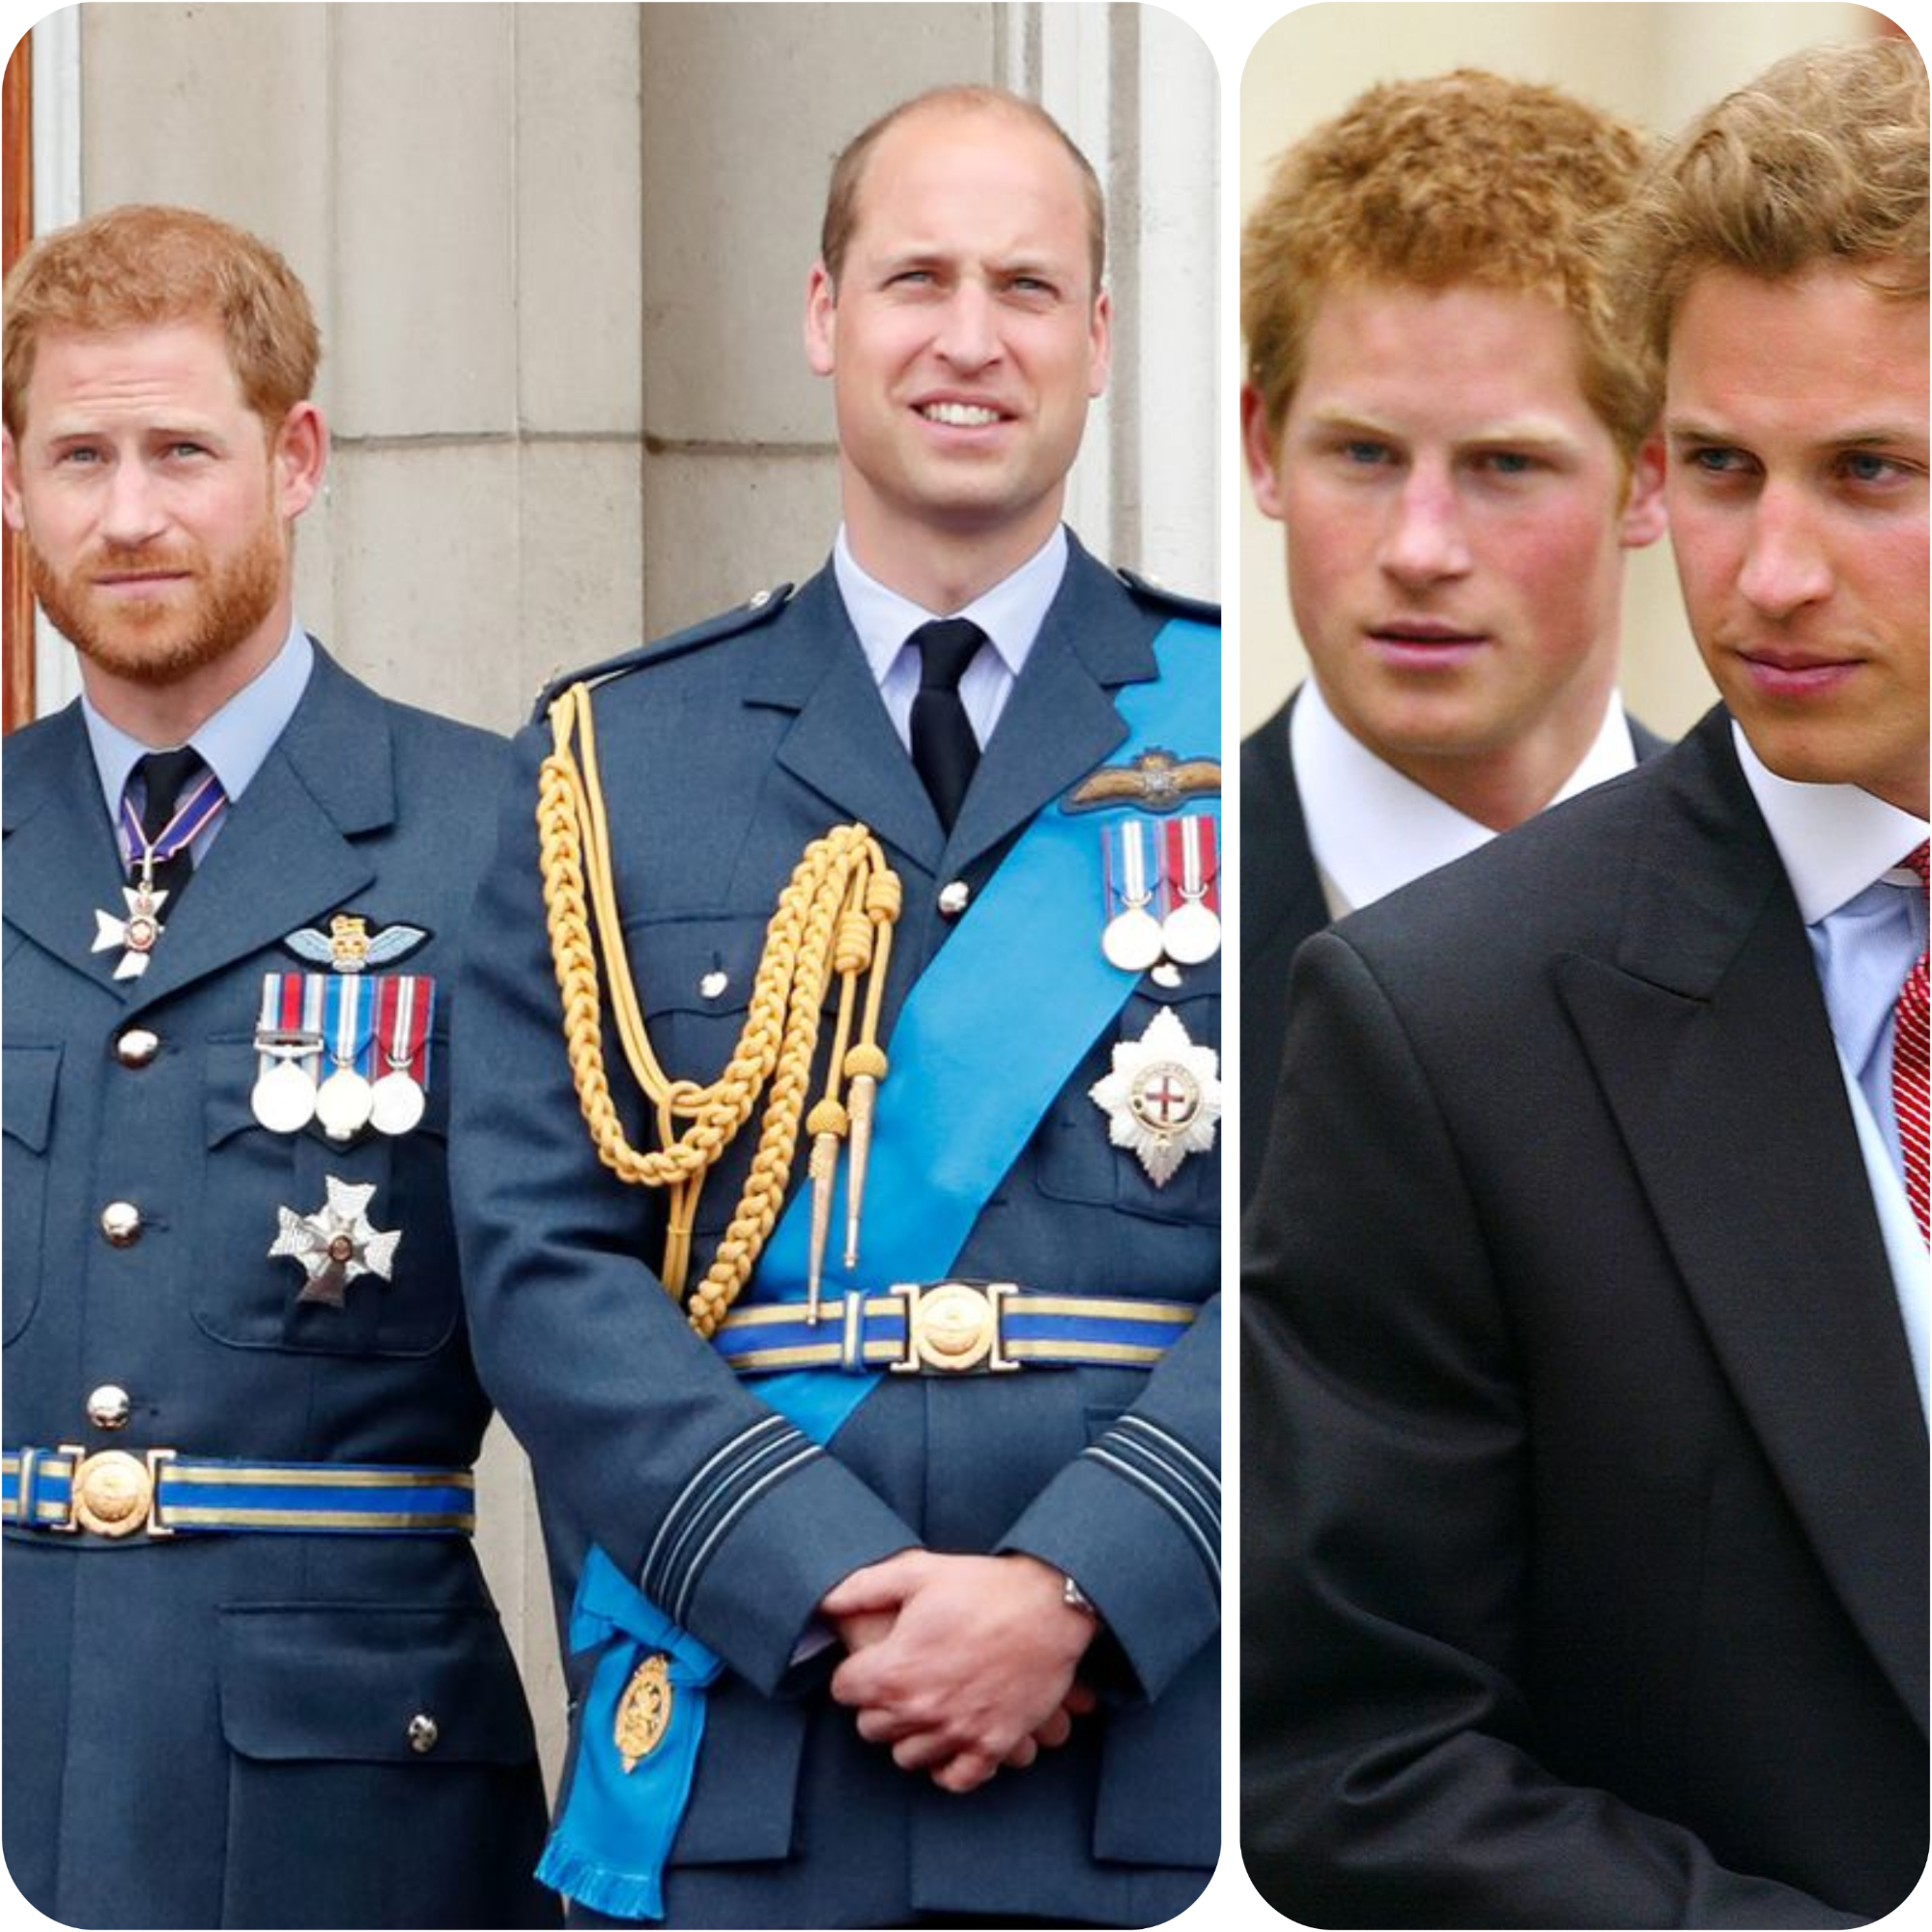 The saga of Prince William and Prince Harry's estrangement continues